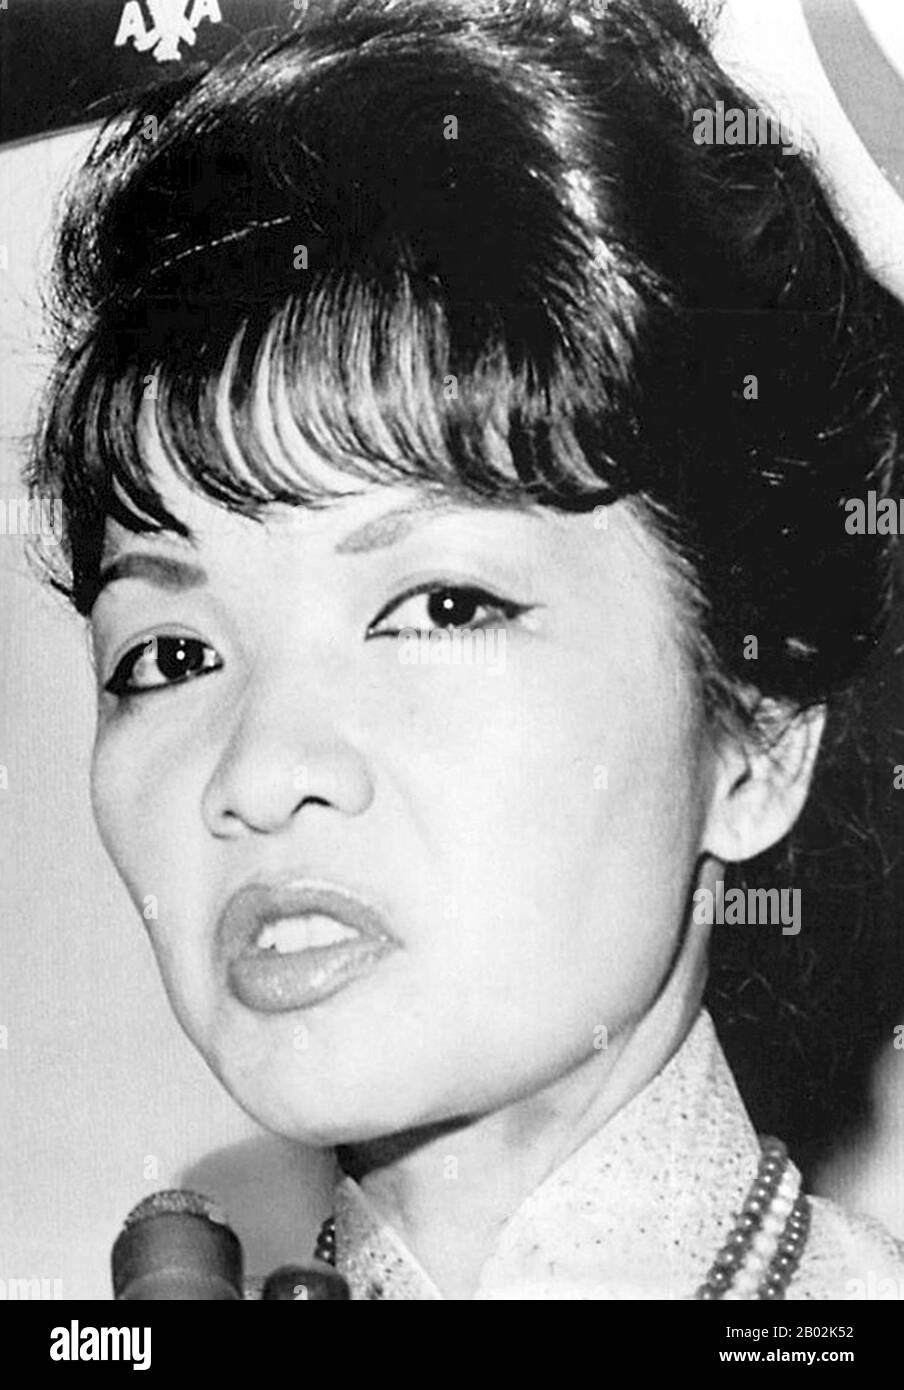 Tran Le Xuan (born April 15, 1924 in Hanoi, Vietnam), popularly known as Madame Nhu but more properly Madame Ngo Dinh Nhu, was considered the First Lady of South Vietnam from 1955 to 1963. She was the wife of Ngo Dinh Nhu, brother and chief adviser to President Ngo Dinh Diem.  As Diem was a lifelong bachelor, and because the Nhus lived in the Independence Palace, she was considered to be the First Lady. Diem often appointed relatives to high positions, so her father became the ambassador to the United States while her mother, a former beauty queen, was South Vietnam's observer at the United Na Stock Photo